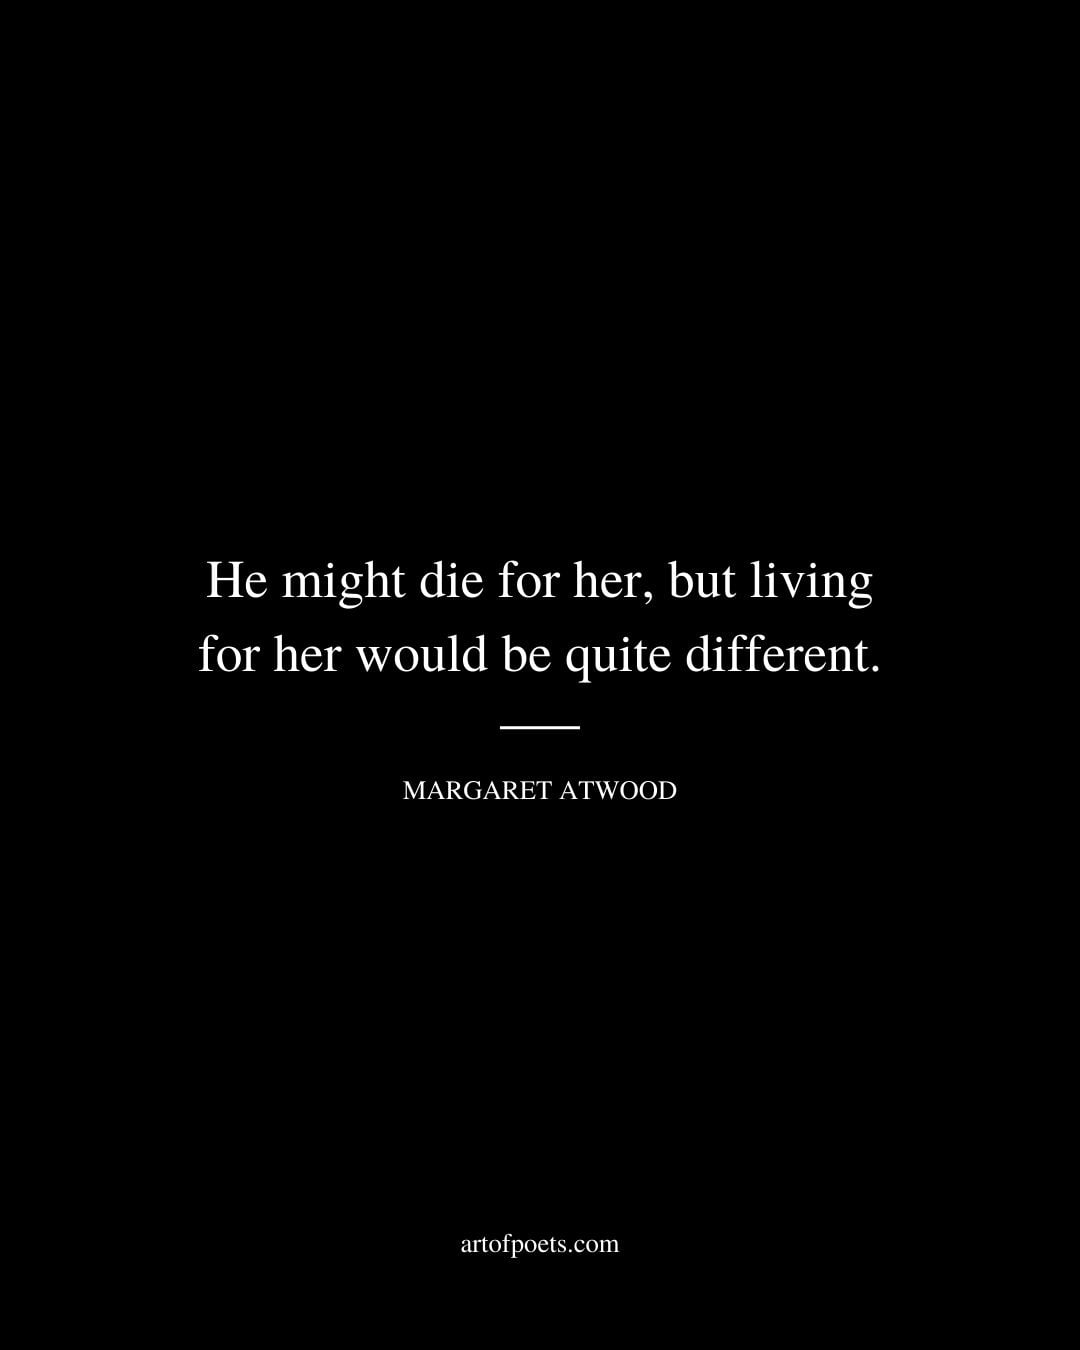 He might die for her but living for her would be quite different